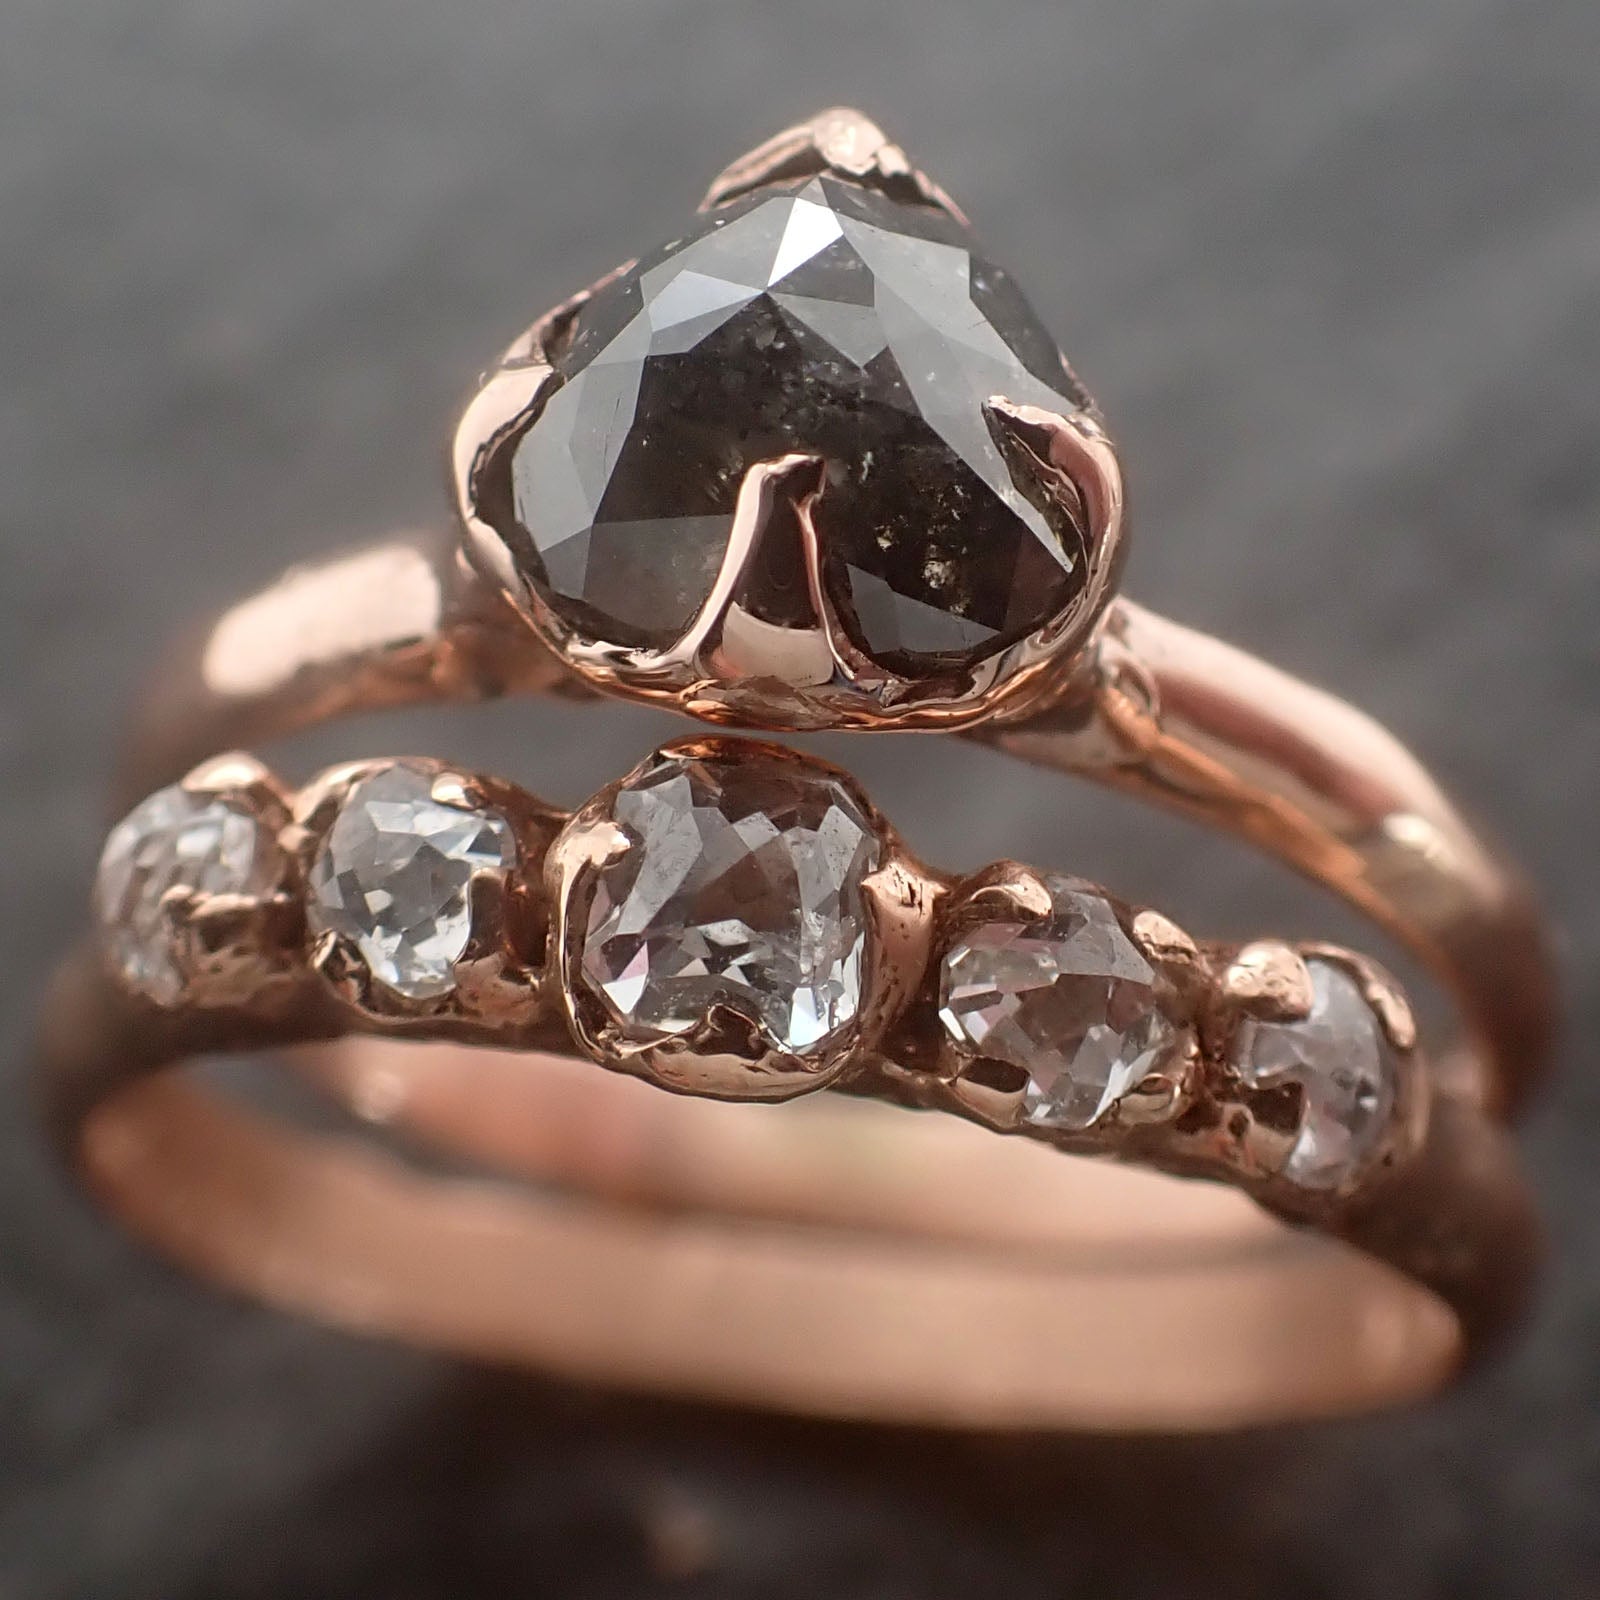 Faceted Fancy cut Salt and Pepper Diamond Solitaire Engagement 14k Rose Gold Wedding Ring byAngeline 2599